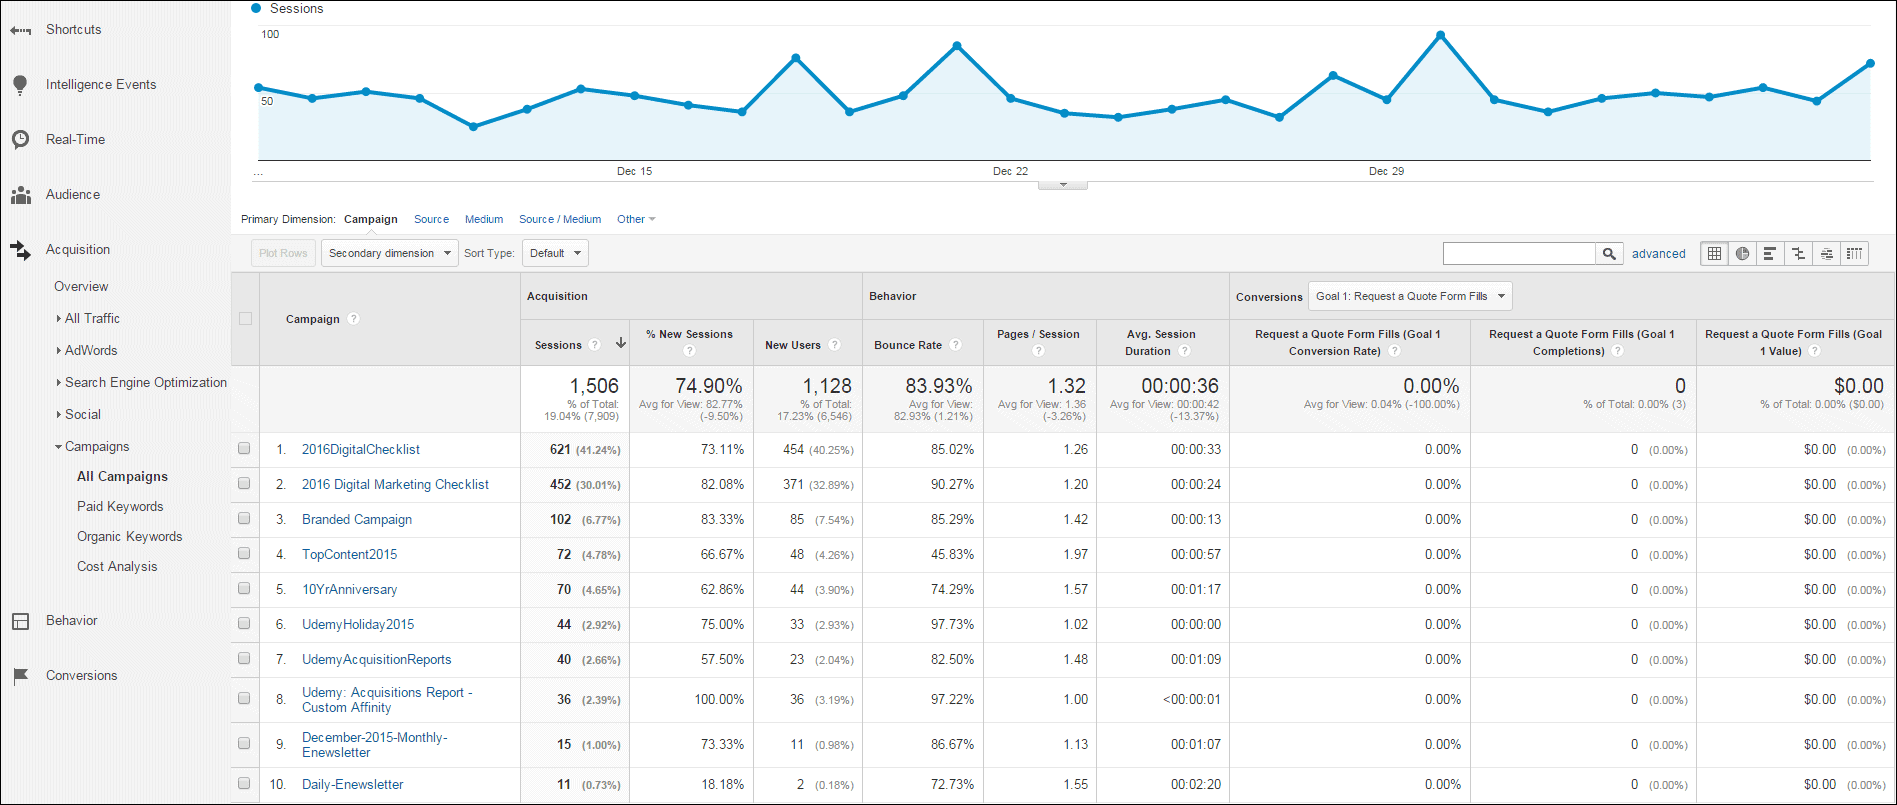 A look at Secondary Dimension within All Campagins in Google Analytics